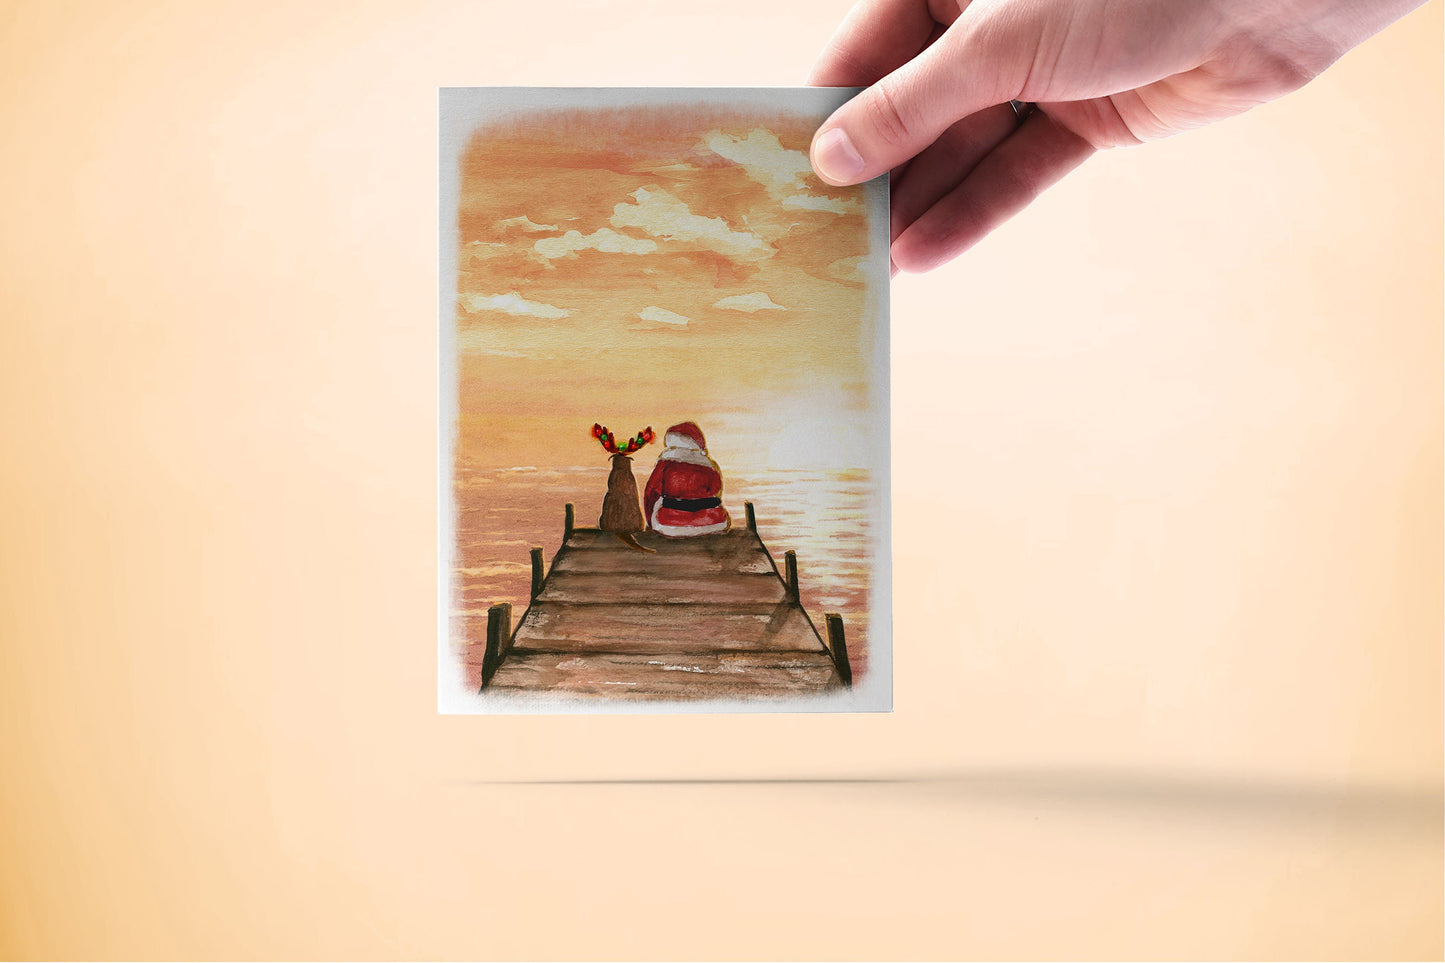 Sunset Christmas Card Set - Santa's Dog Boat Dock Gift For Her - Tropical Beach Christmas In July Lake House Gifts For Him